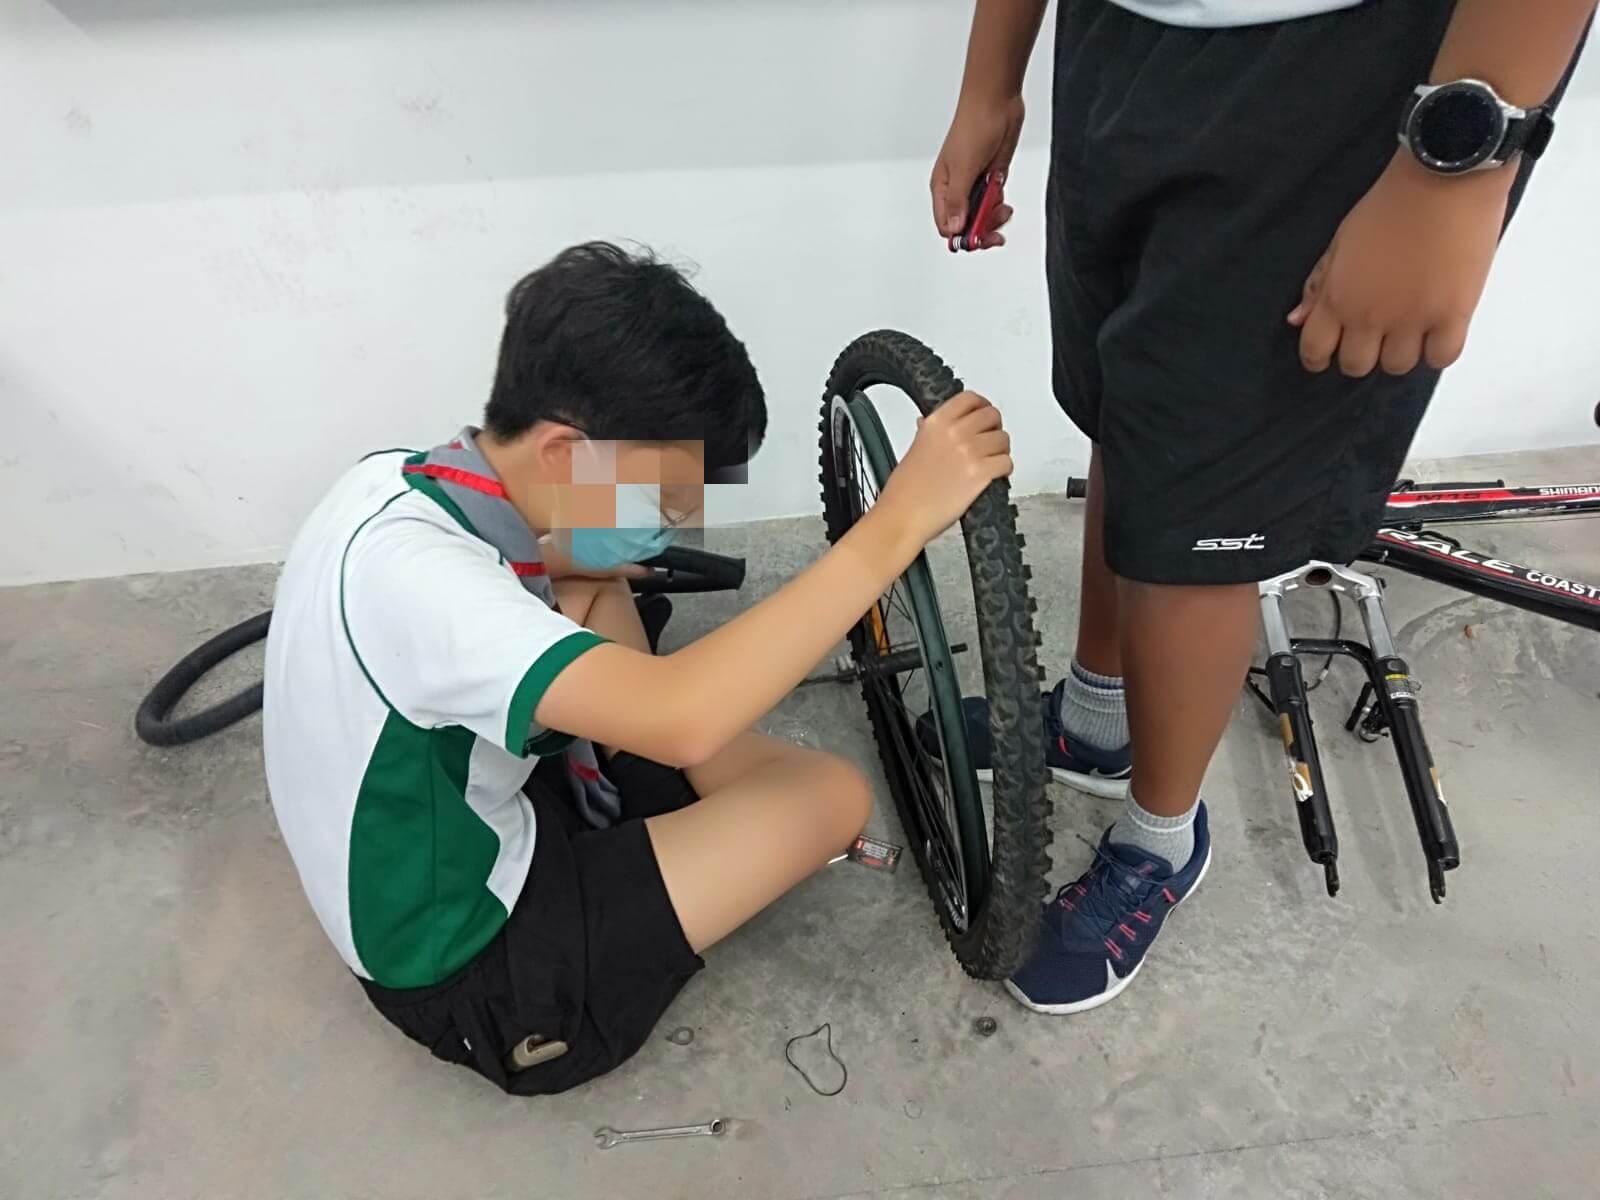 A male child fixing a bicyle flat tyre